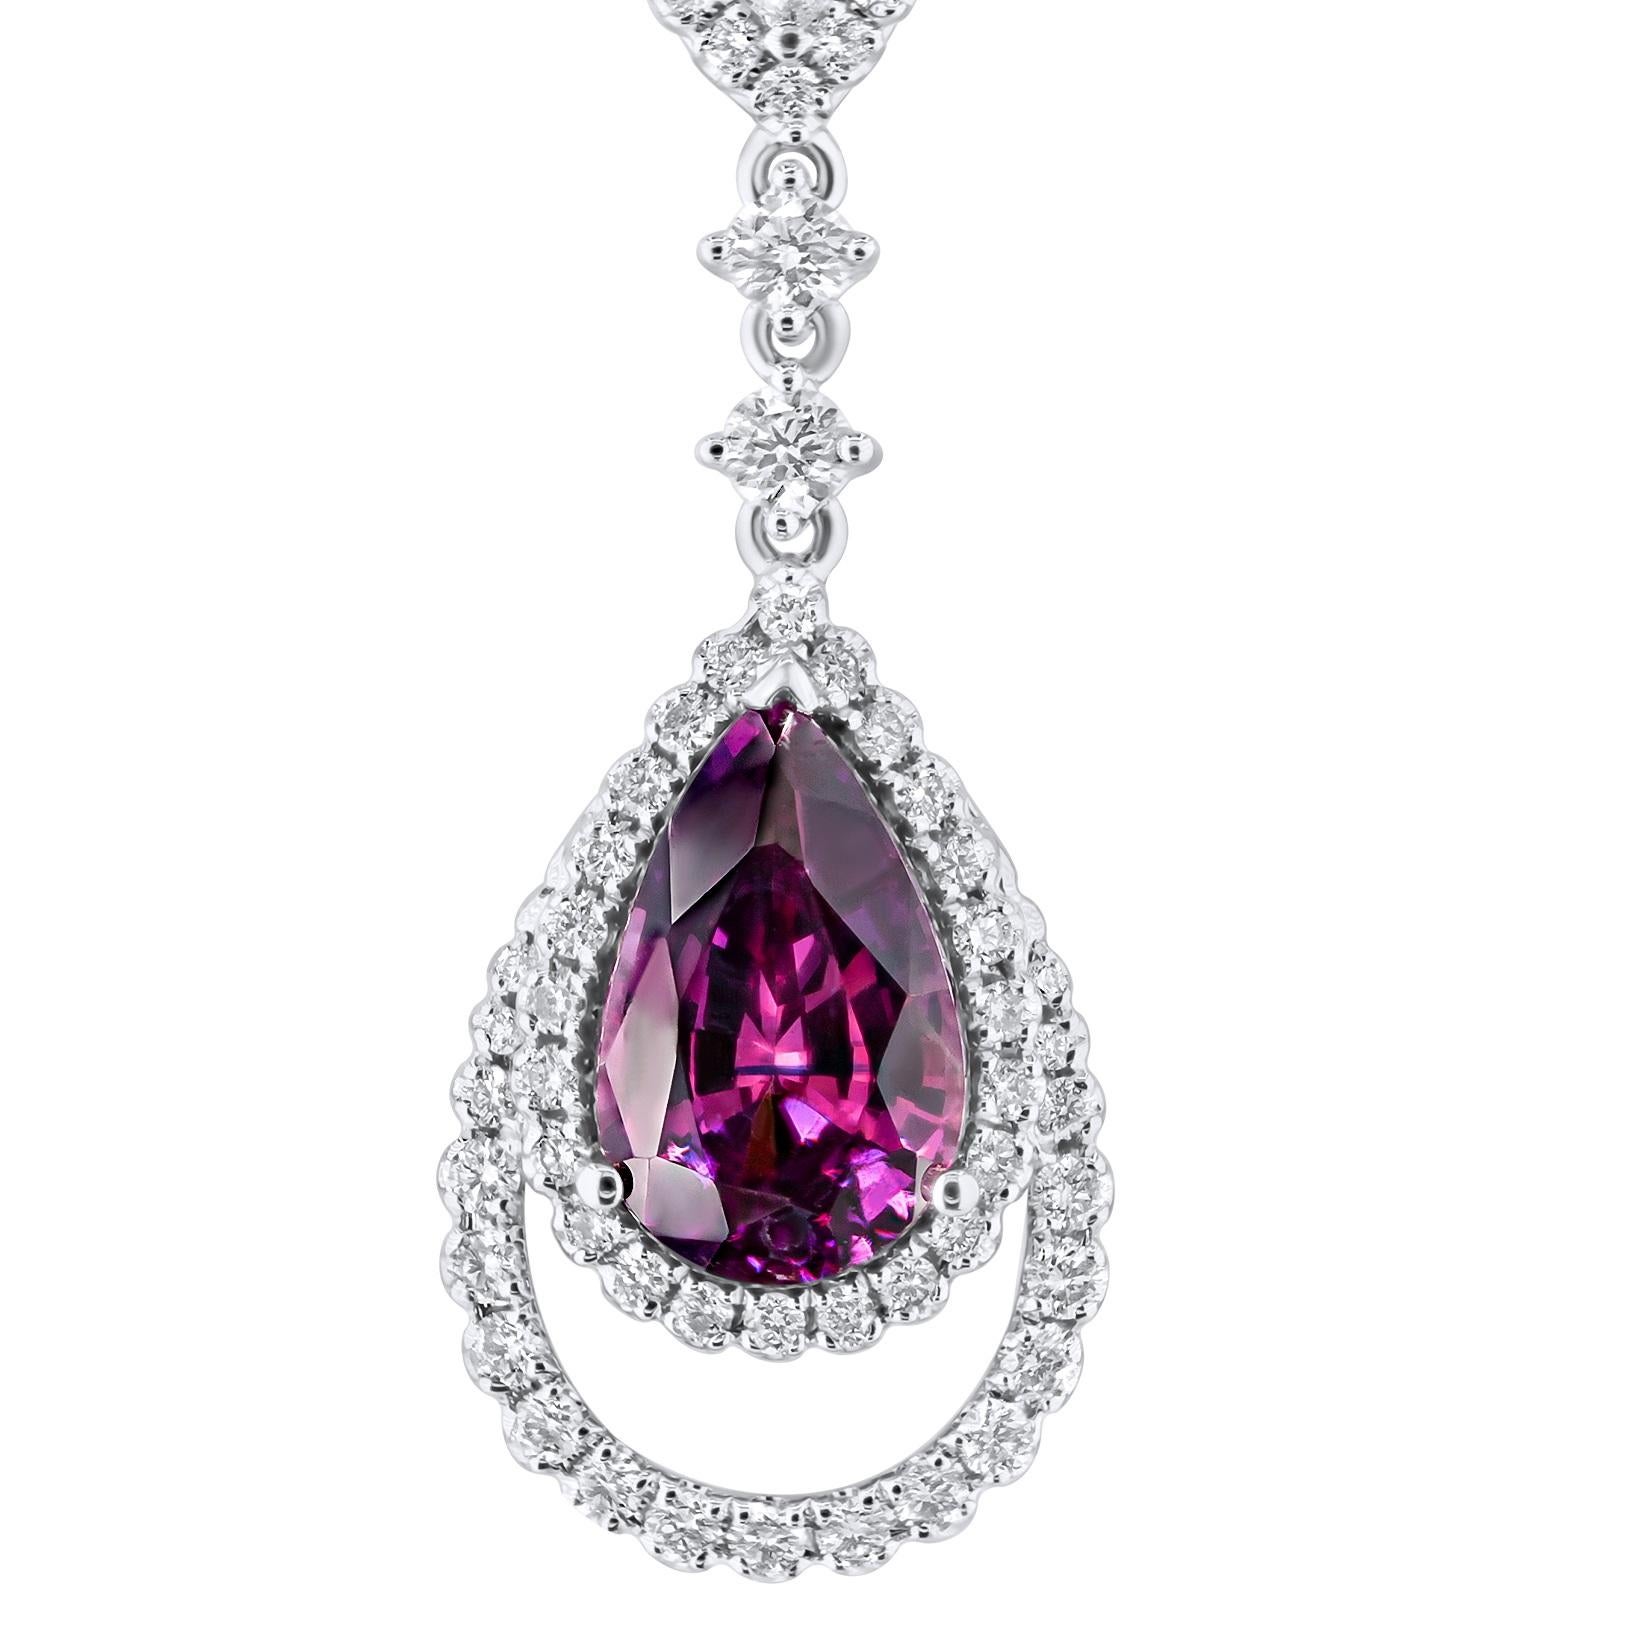 This exquisite pendant showcases a 1.72 carat pear-shaped rose pink sapphire, elegantly encircled by a halo of round diamonds and nested within an additional frame of round white diamonds. An elegant suspended design is created with the inclusion of